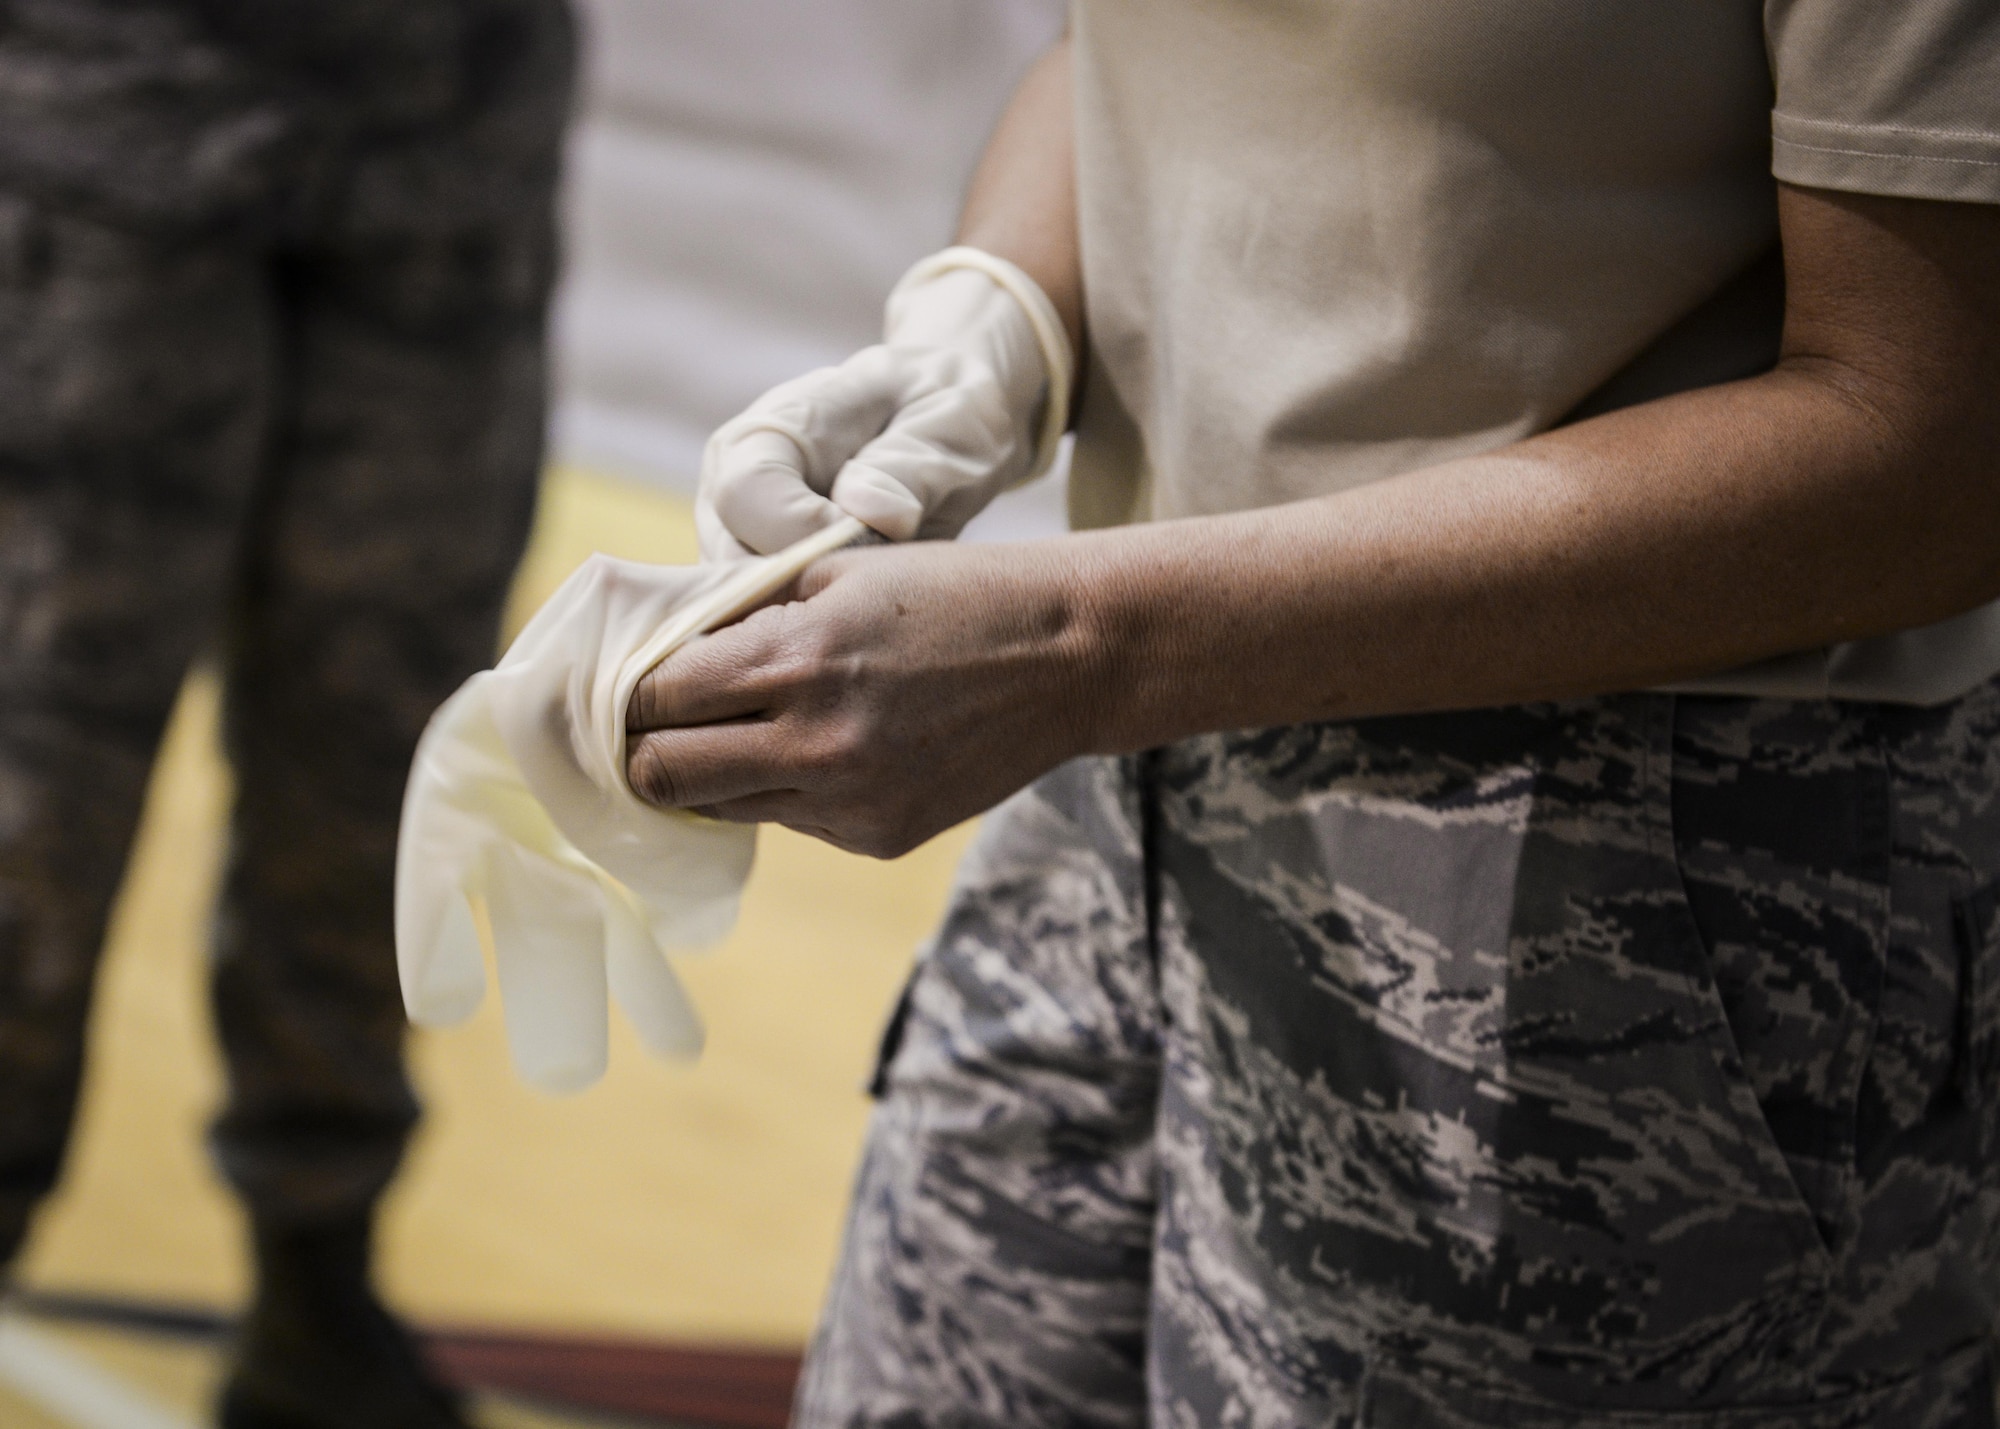 Capt. Dawn Souza from the 1st Special Operations Medical Group, dons gloves during a disease containment exercise at Hurlburt Field, Fla., Feb. 4, 2015. This exercise is an annual requirement that helps squadrons across Hurlburt to coordinate and work together to ensure they are properly trained to react to a disease on base, as well as in the community. (U.S. Air Force photo Senior Airman Meagan Schutter/Released)